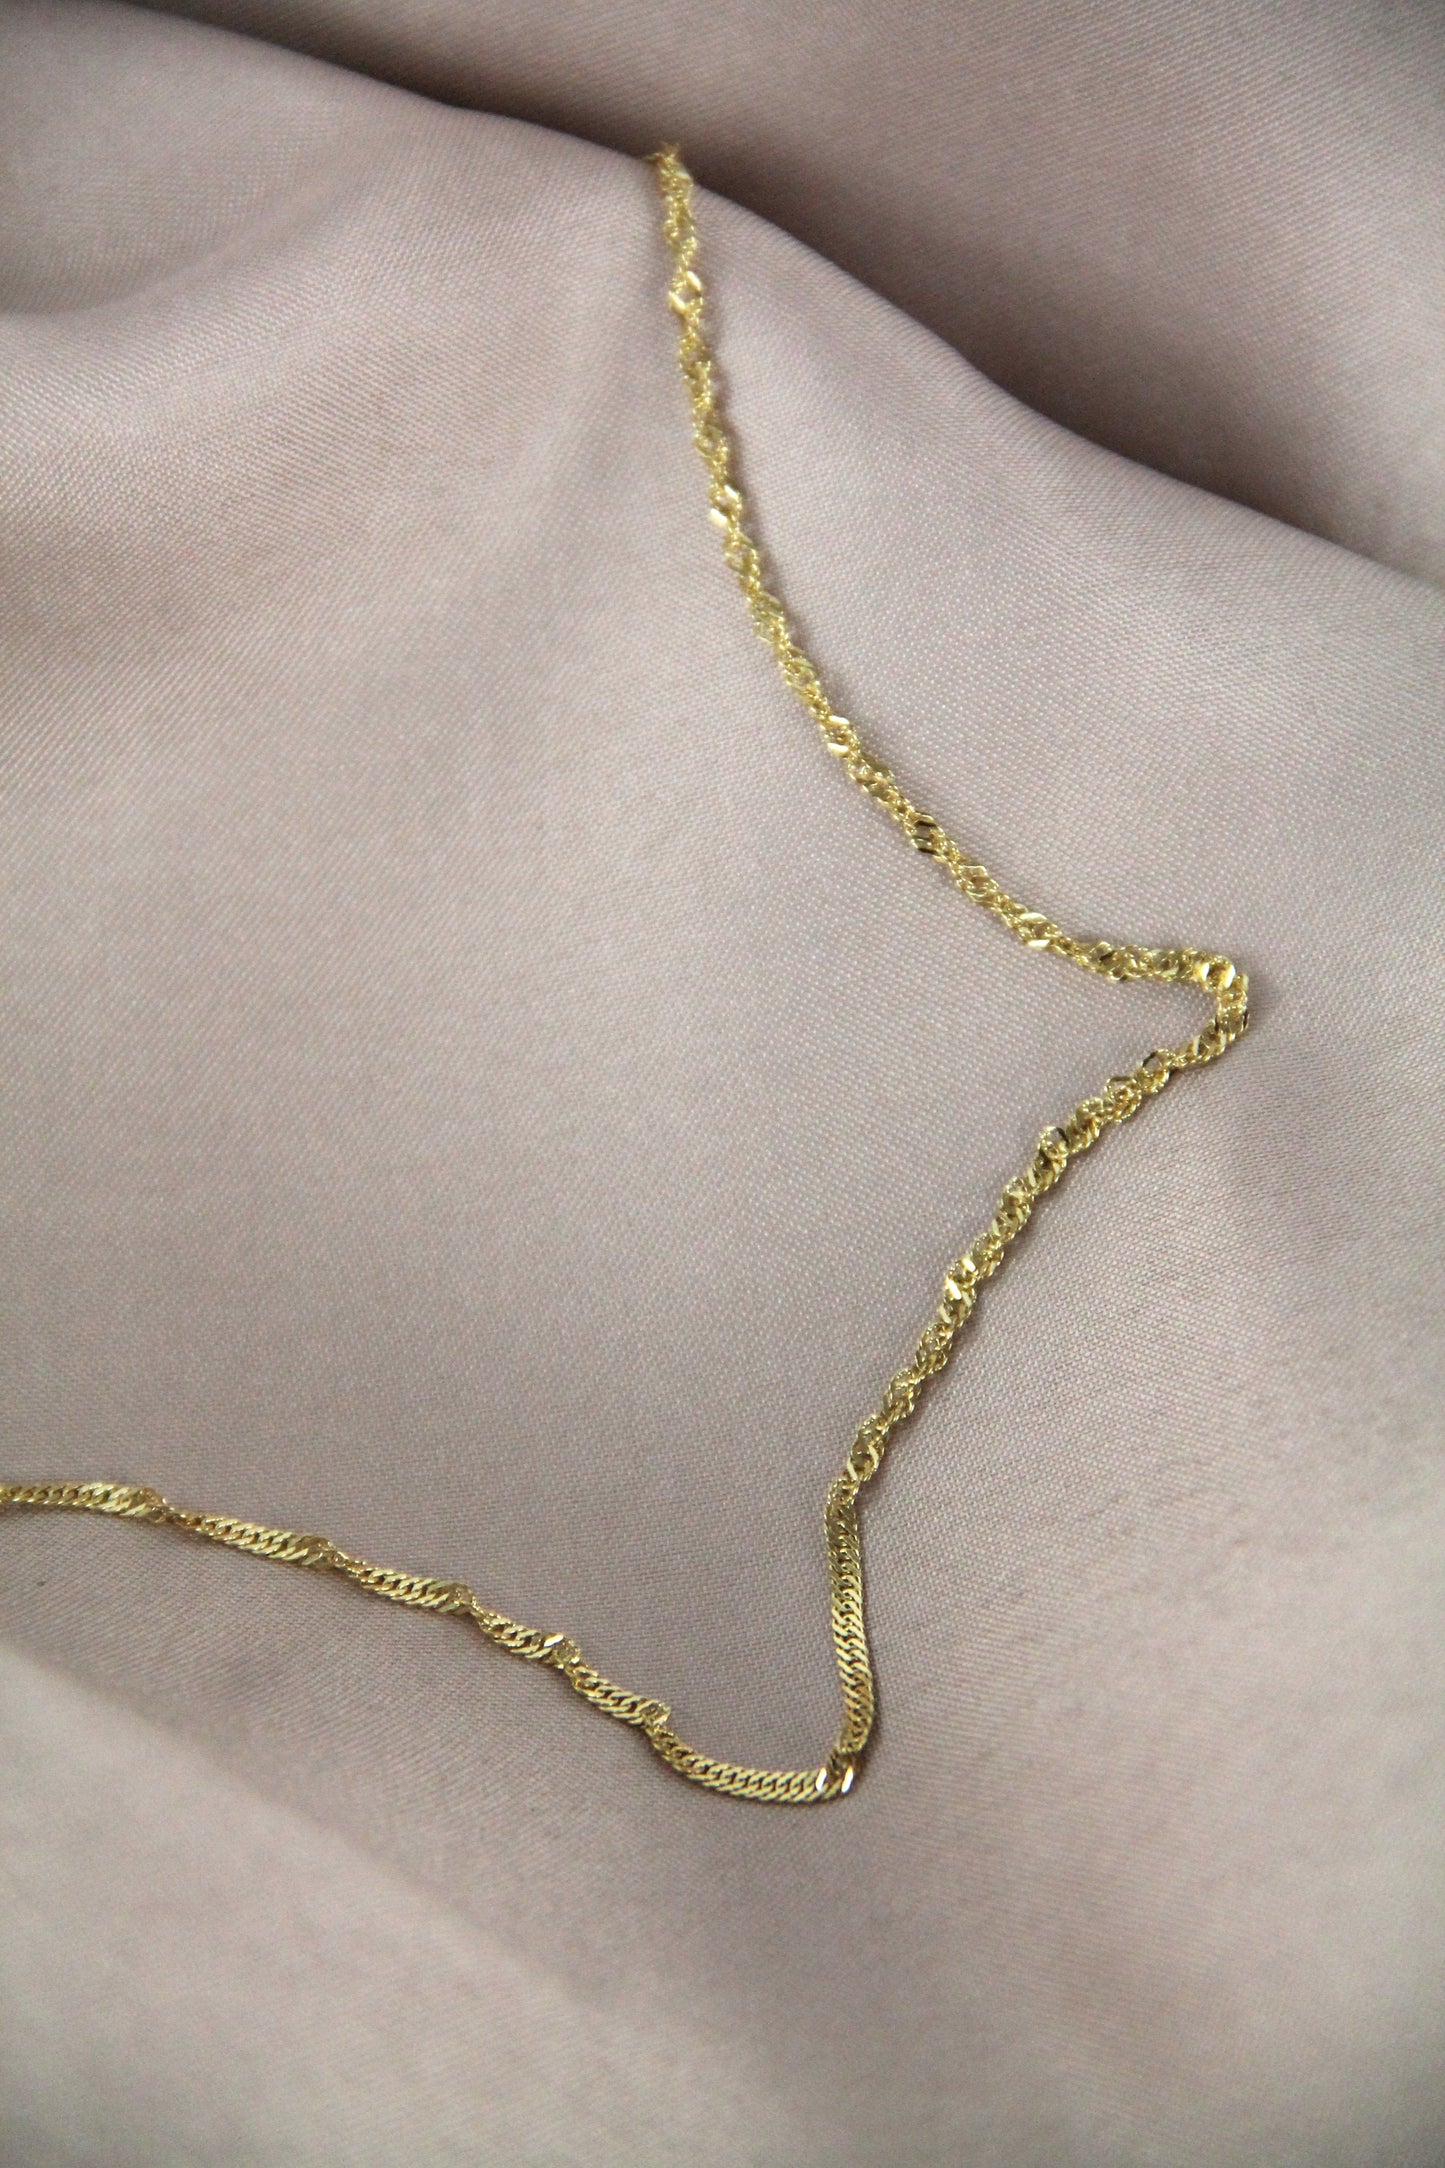 DAINTY chain necklace